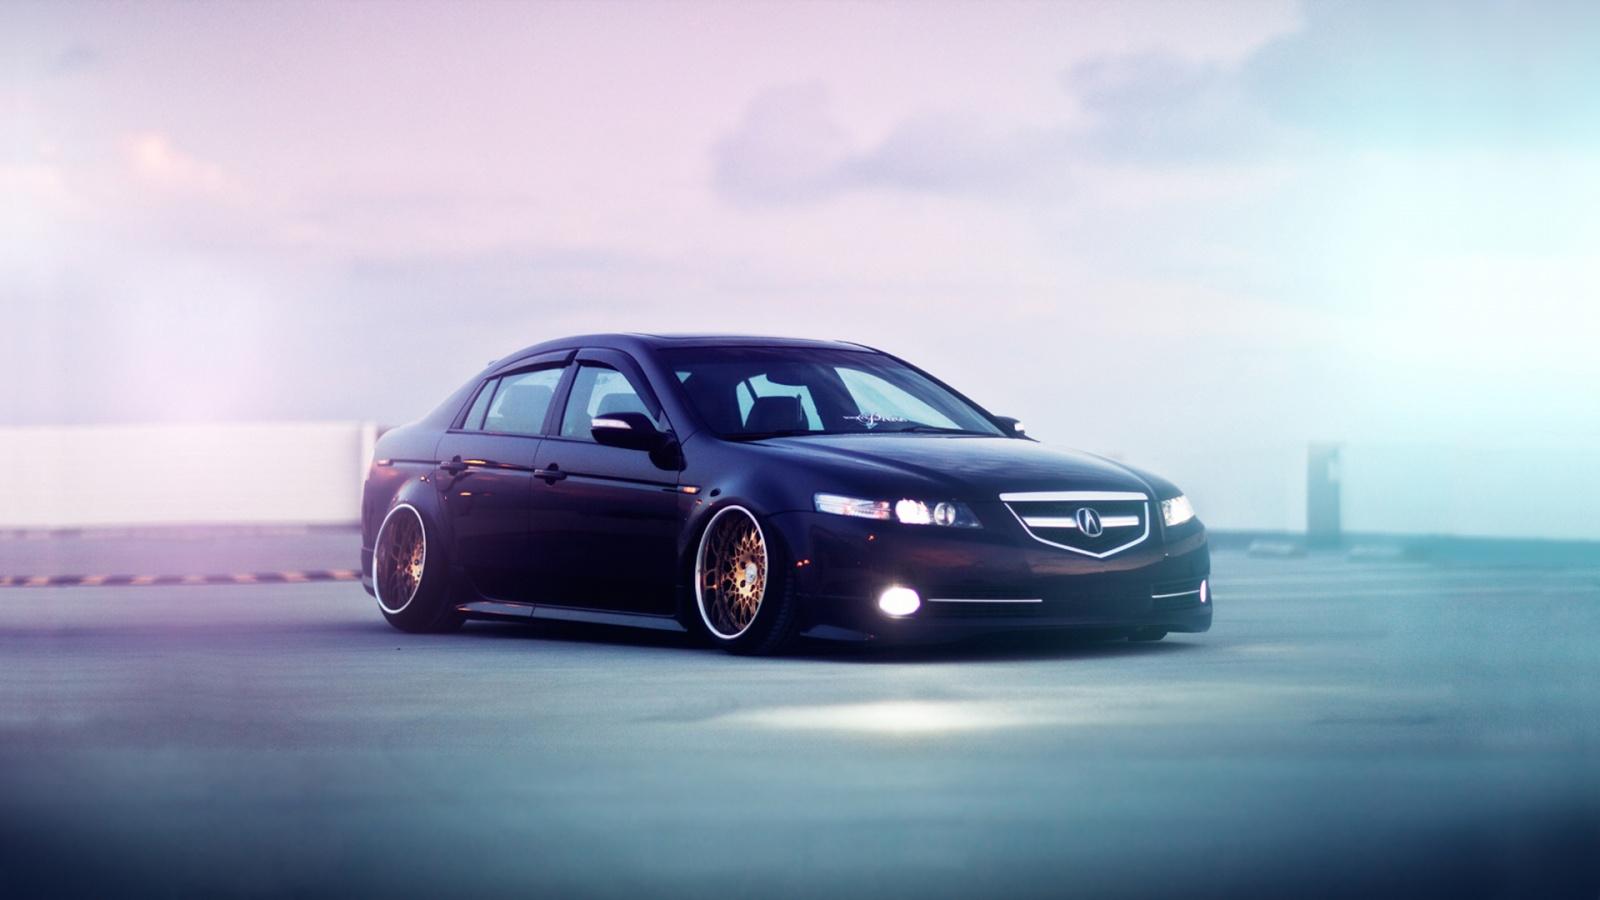 Acura TL Stance Wallpaper